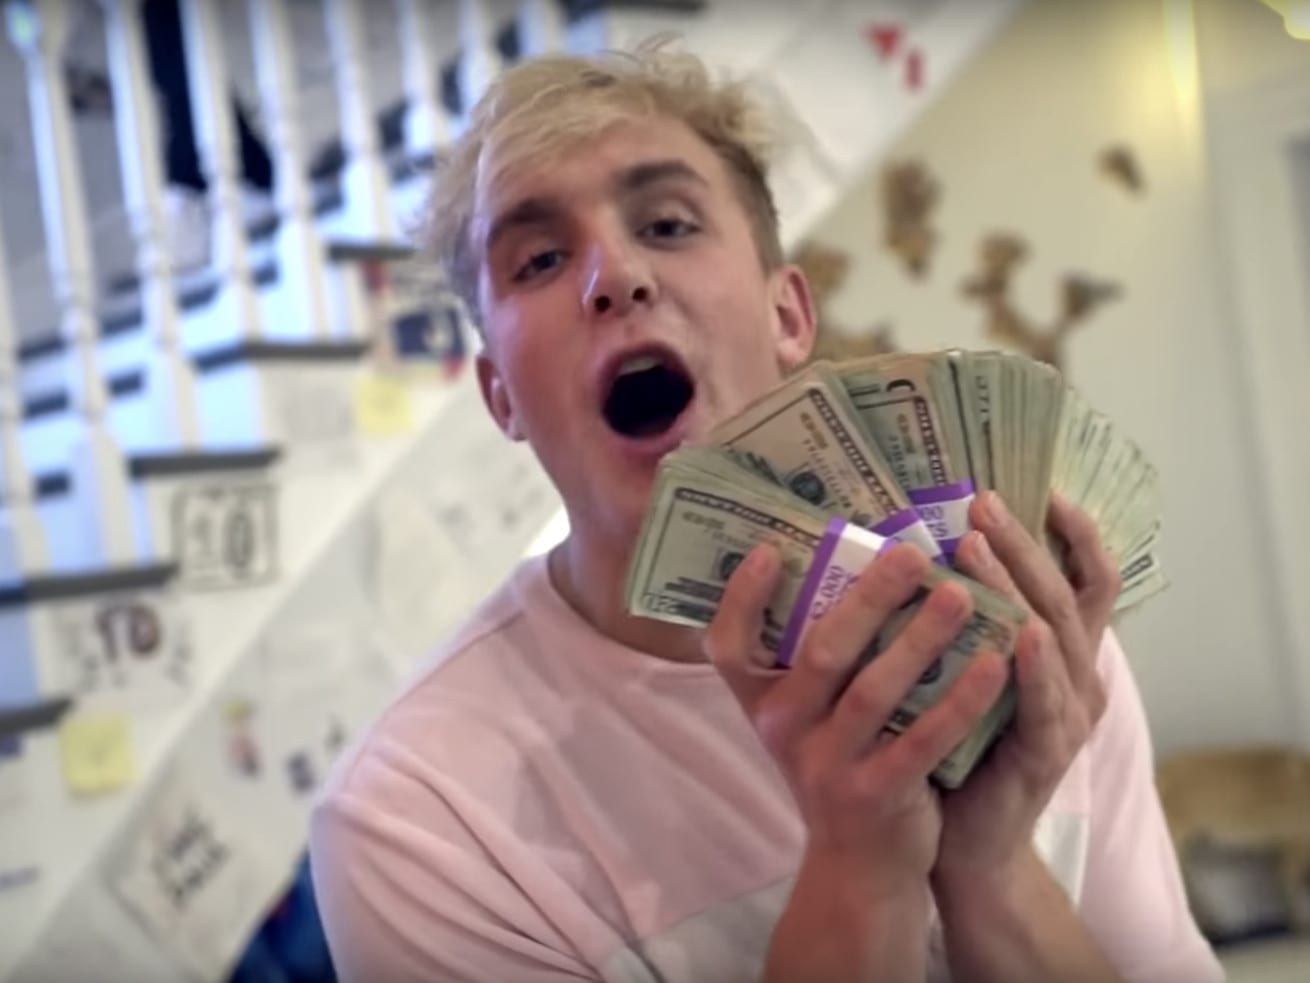 YouTube stars promoted gambling to kids. Now they have to answer to their peers.